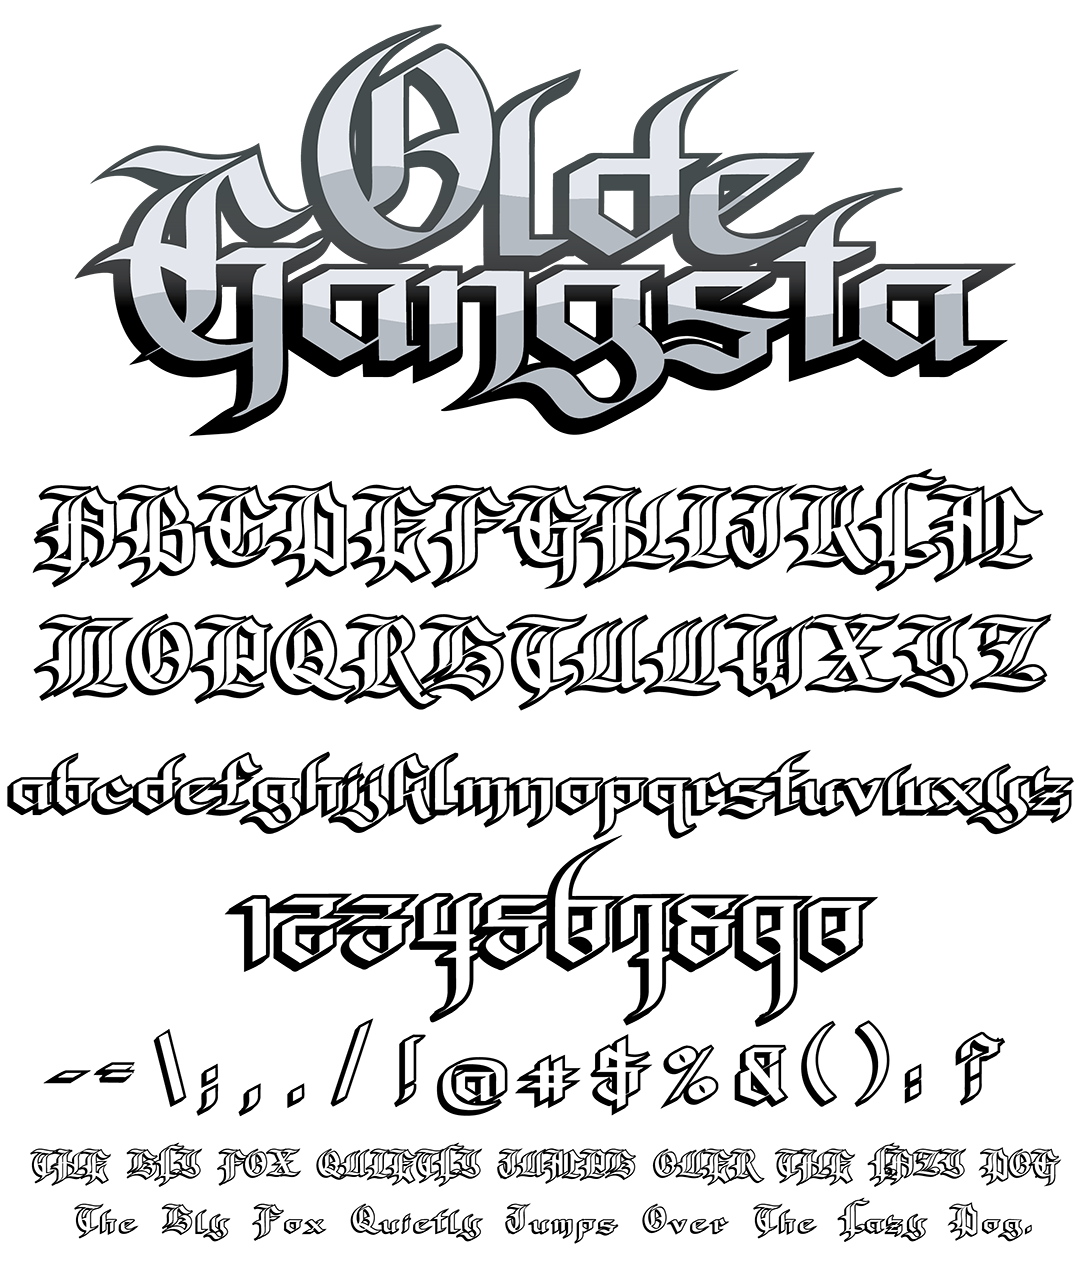 Graffiti Fonts Olde Gangsta The old english script makes your designs look like they are from the middle ages. graffiti fonts olde gangsta